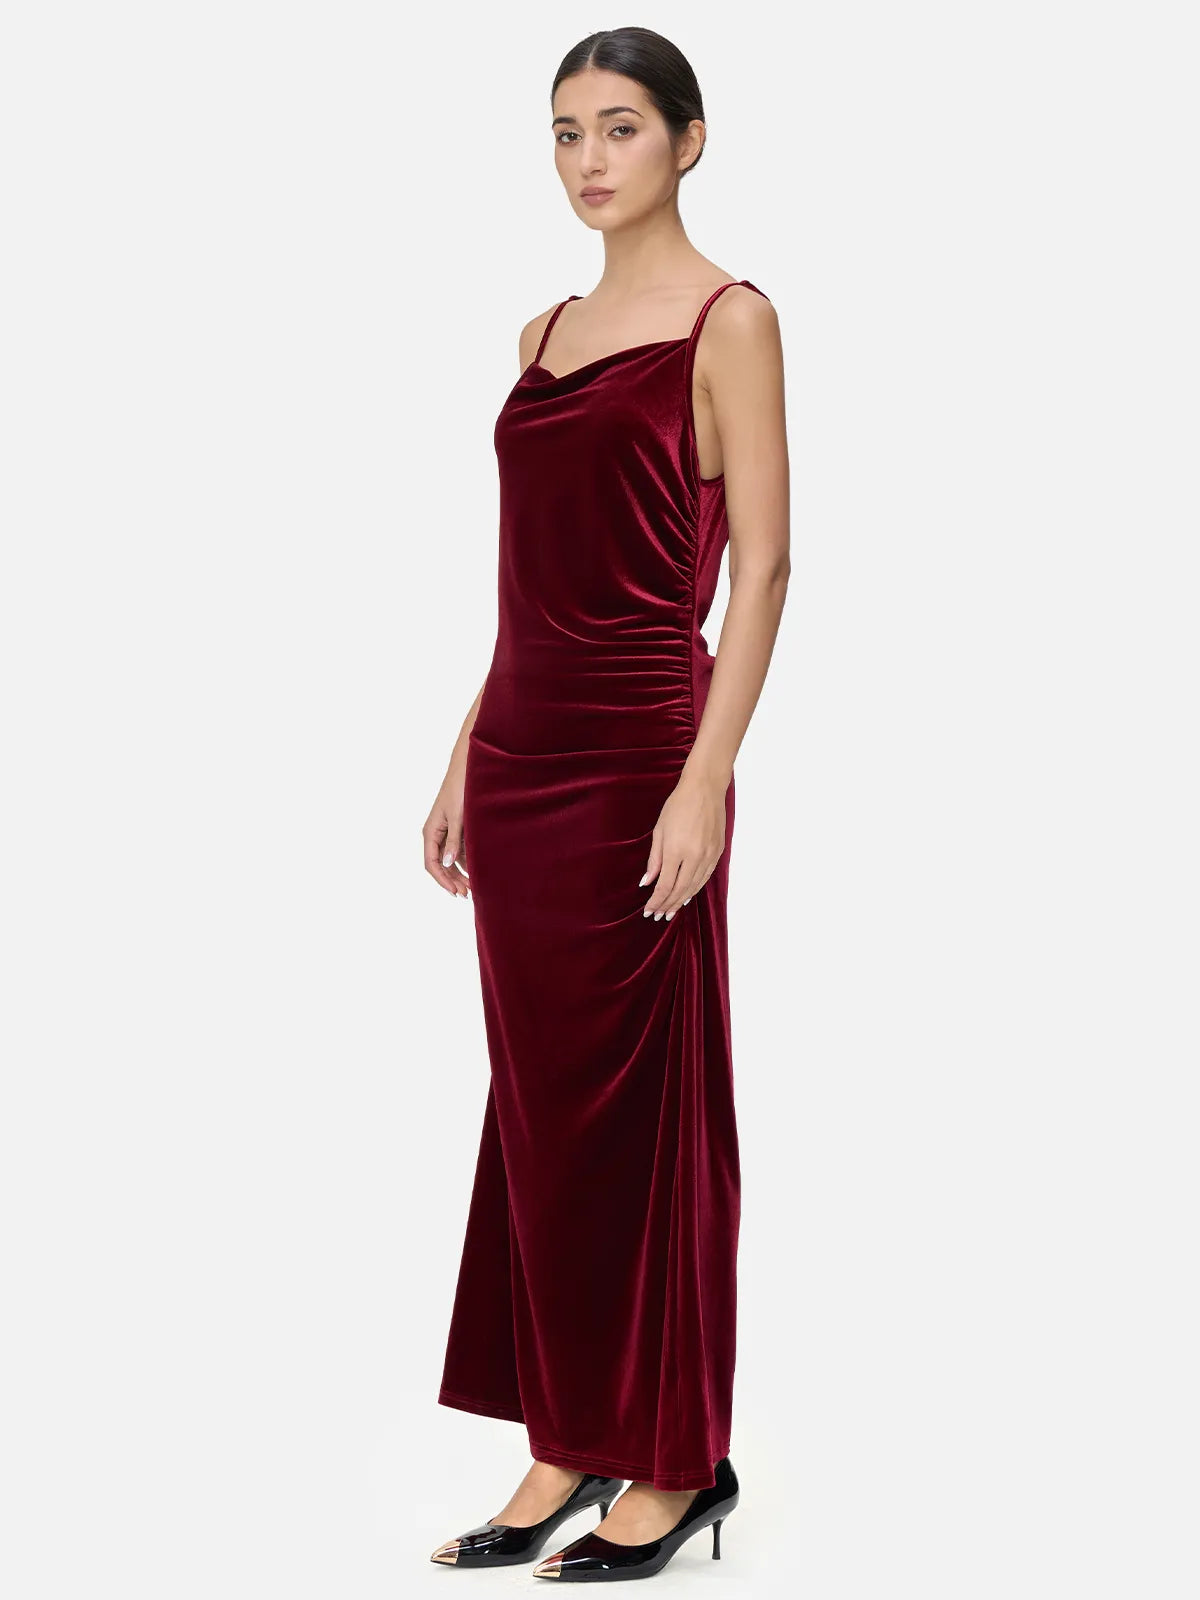 A velvet spaghetti strap maxi dress with irregular V-neck and pleated detailing, showcasing the graceful charm of women